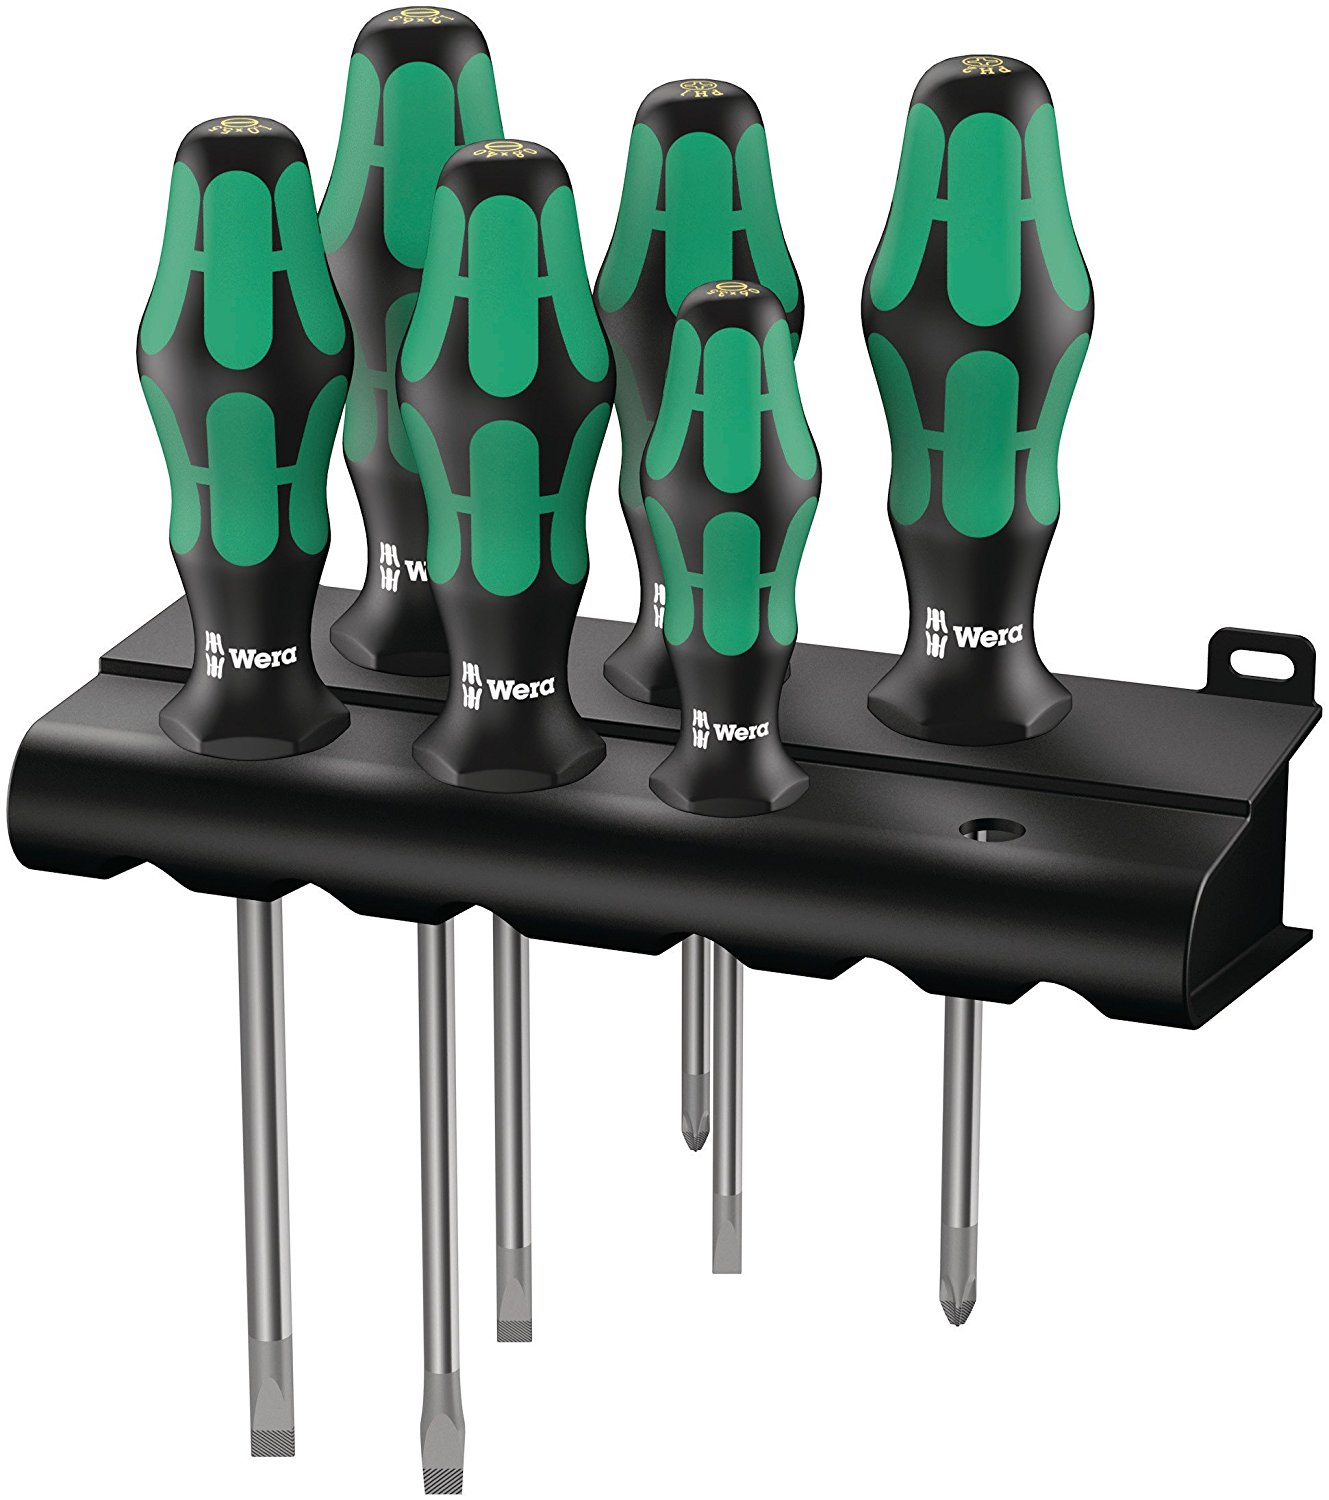 Save up to 20% on best selling Wera tools for Father’s Day!